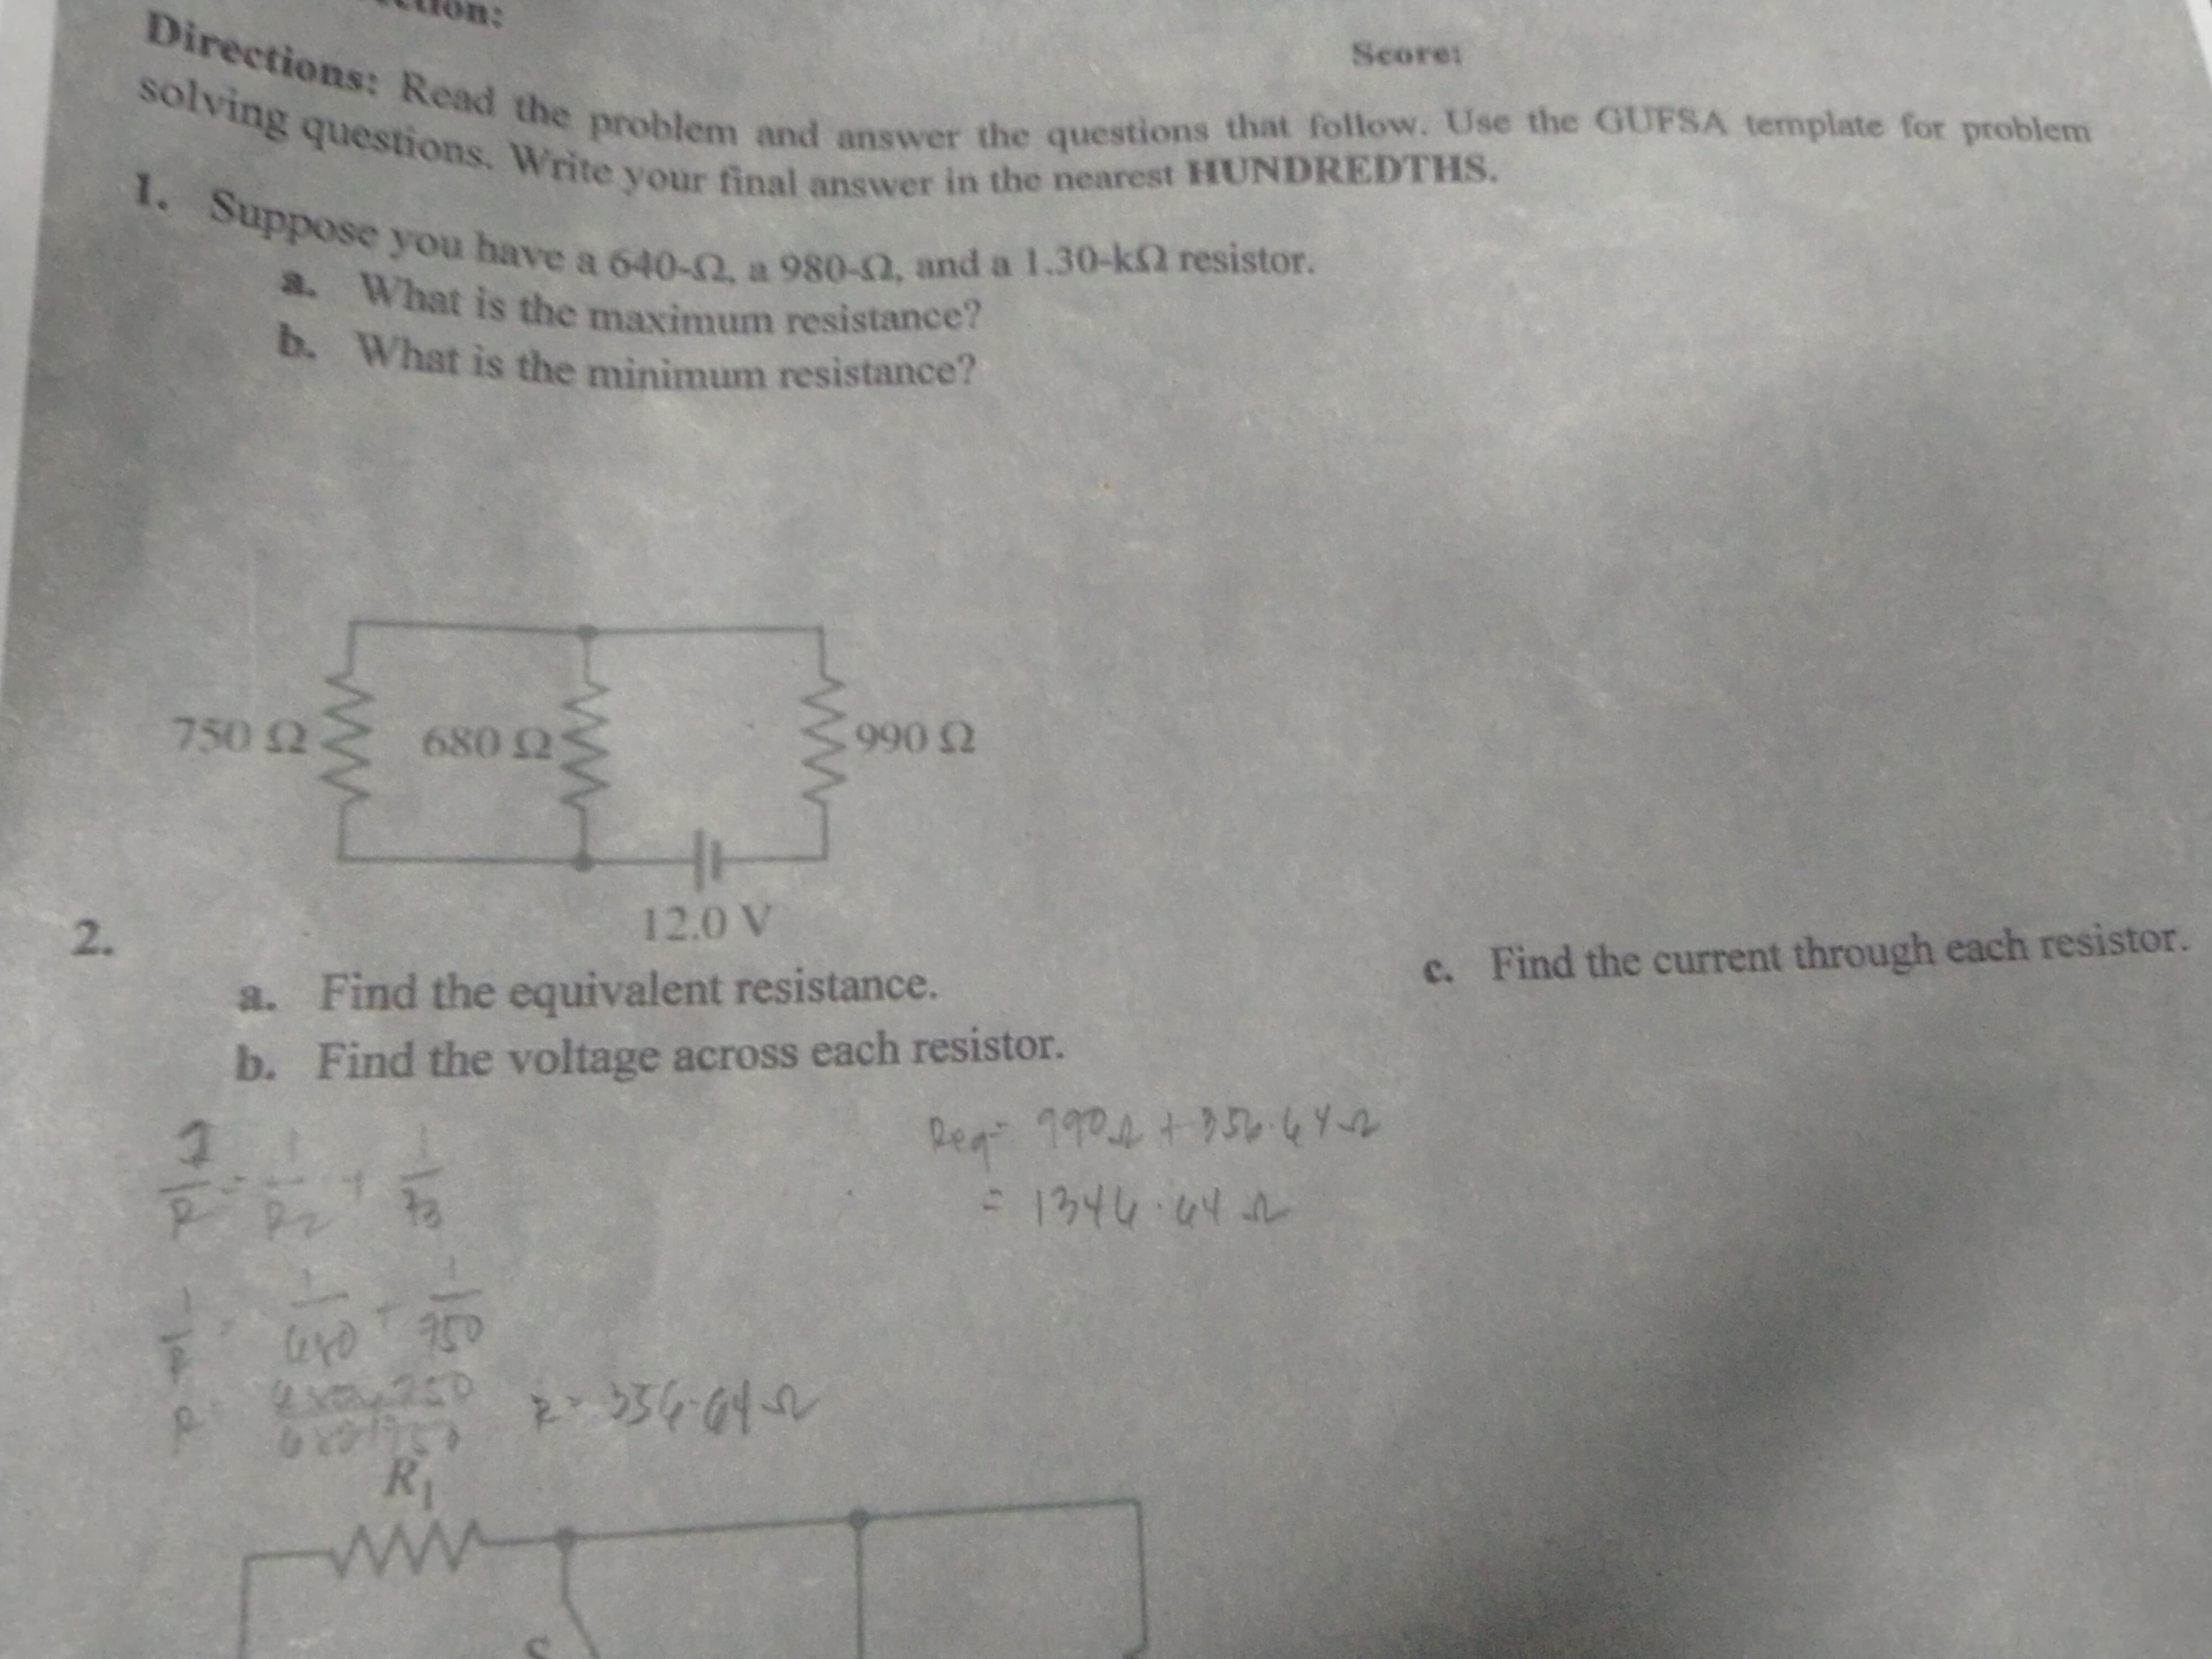 Directions: Read the problem and answer the questions that follow. Use the GUFSA template for problem
solving questions. Write your final answer in the nearest HUNDREDTHS.
1. Suppose you have a 640-2, a 980-2, and a 1.30-k2 resistor.
a. What is the maximum resistance?
b. What is the minimum resistance?
Score:
750 2
680 2
990 2
2.
12,0 V
c. Find the current through each resistor.
a. Find the equivalent resistance.
b. Find the voltage across each resistor.
Reg"
990 +750.6Y2
S1346か心レ
750
R1
